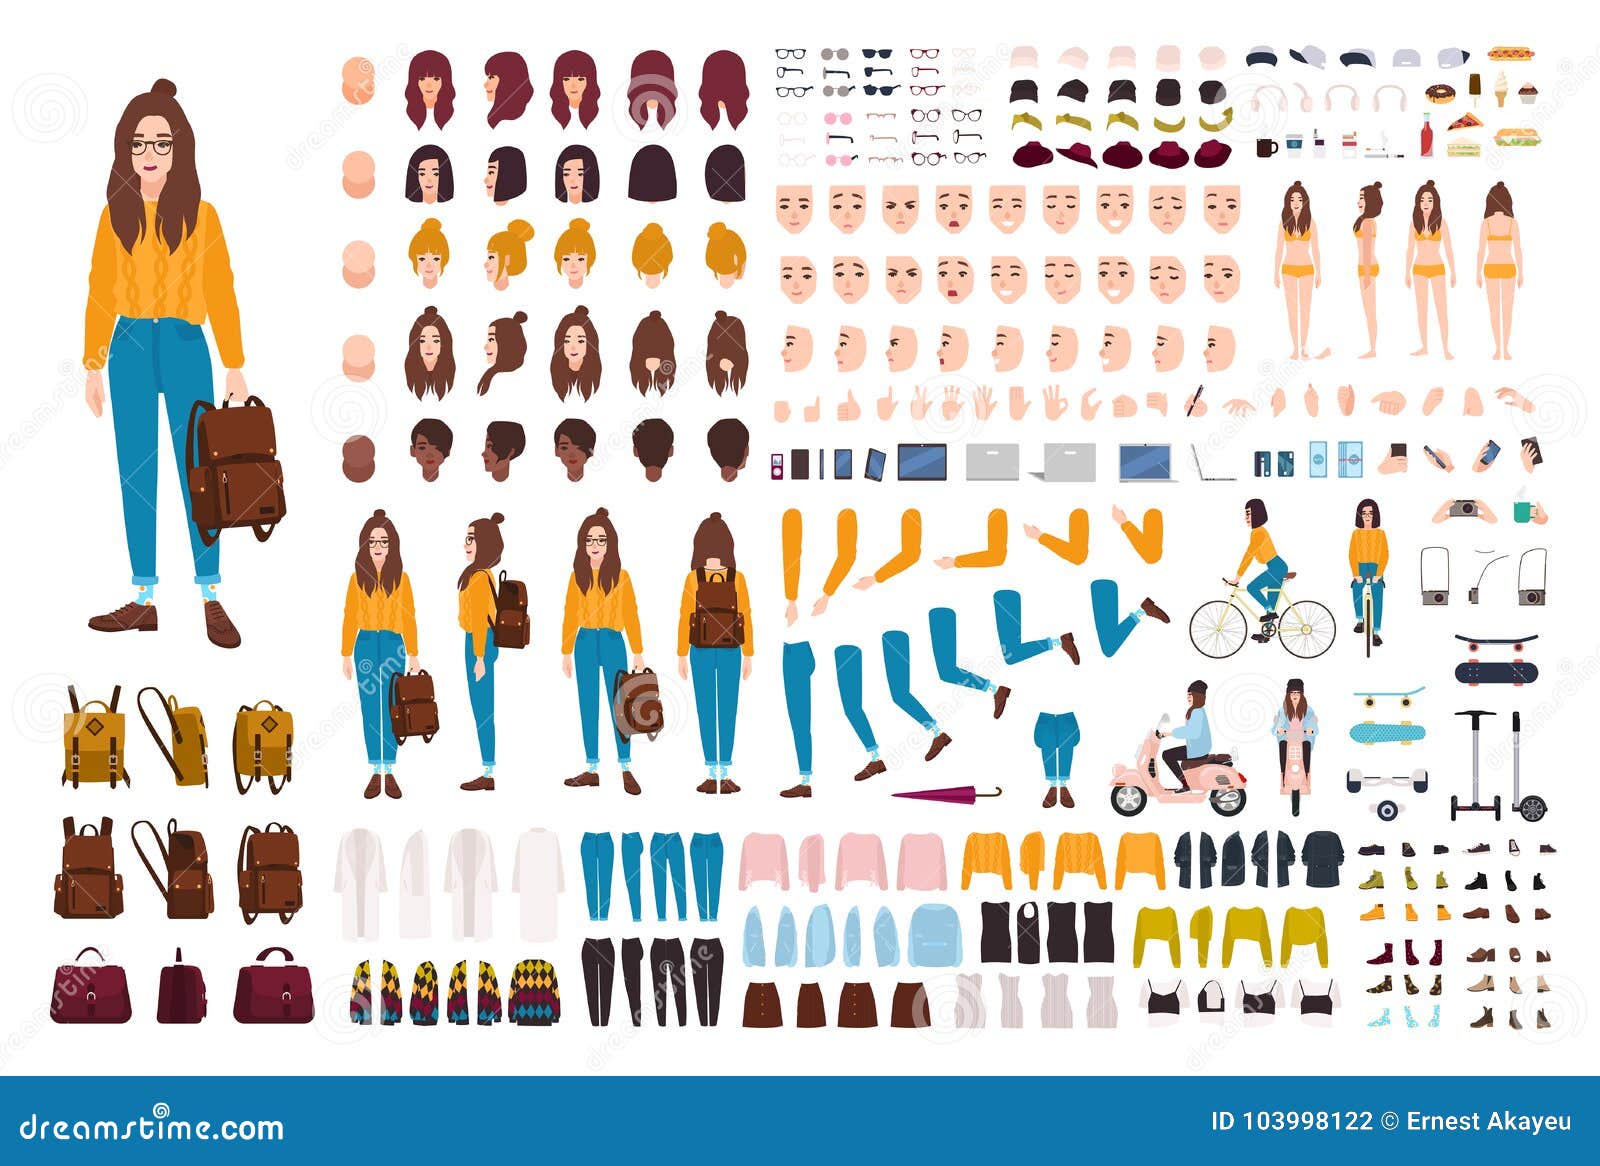 hipster girl creation kit. set of flat female cartoon character body parts, facial gestures, hairstyles, trendy clothing